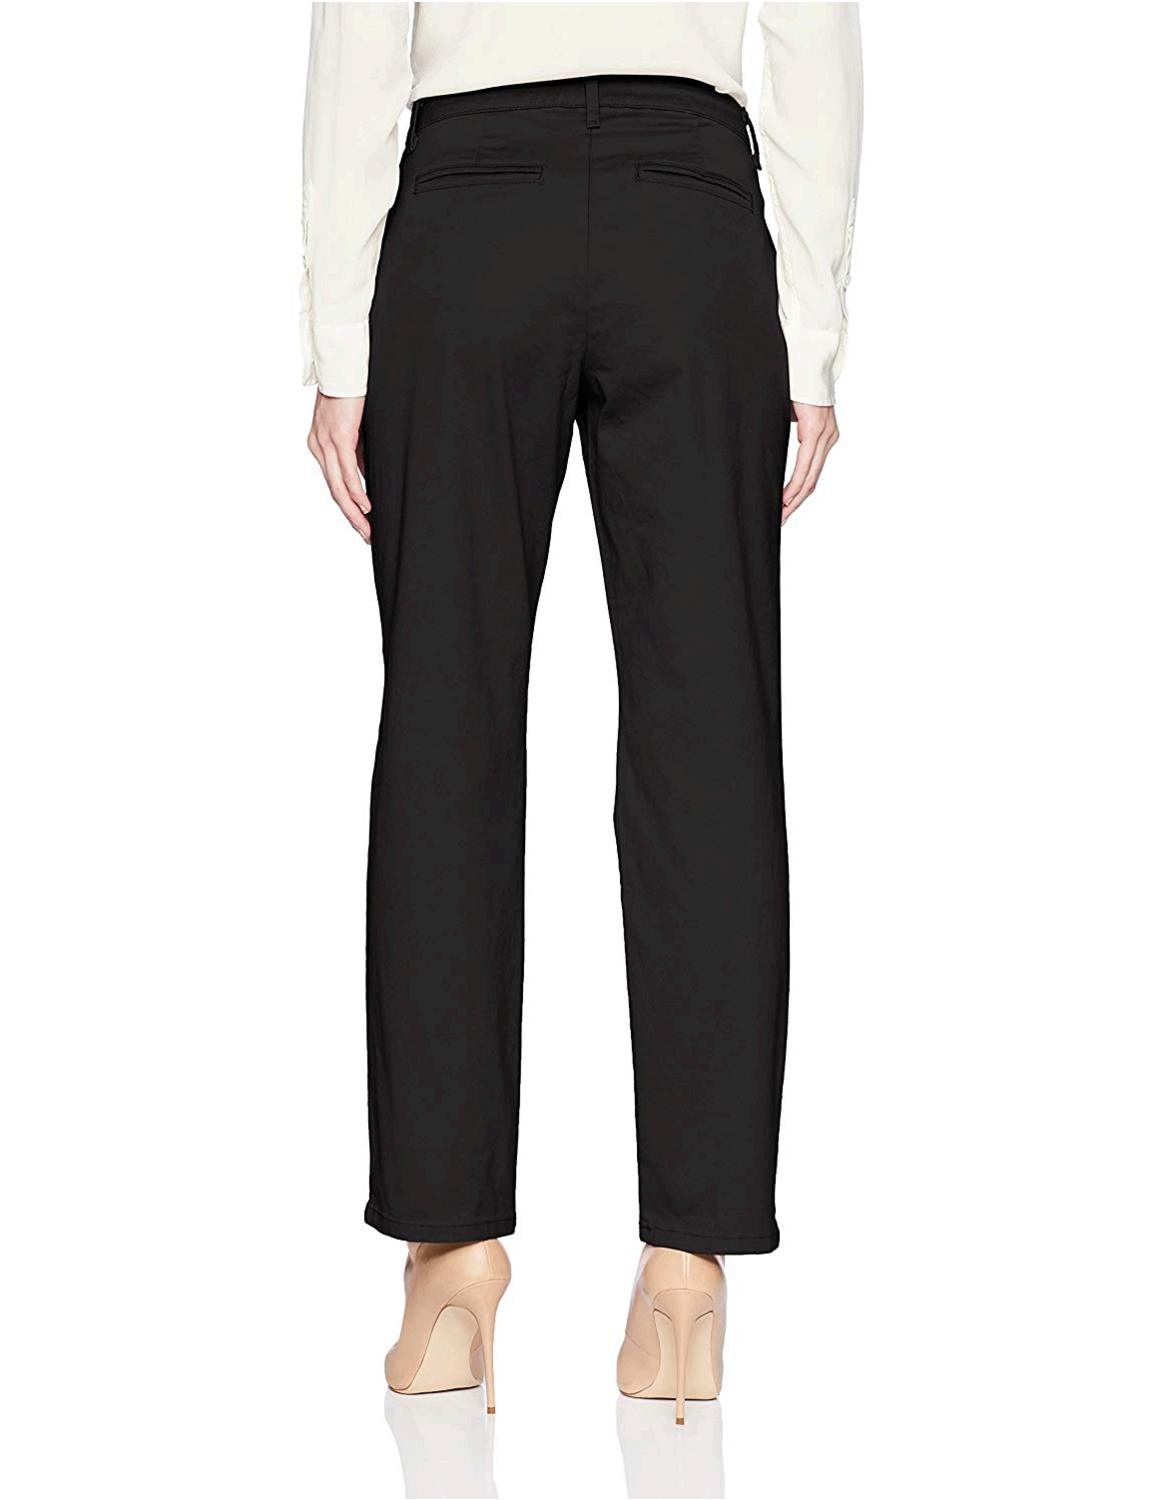 LEE Women's Petite Relaxed Fit All Day Straight Leg Pant,, Jet Black ...